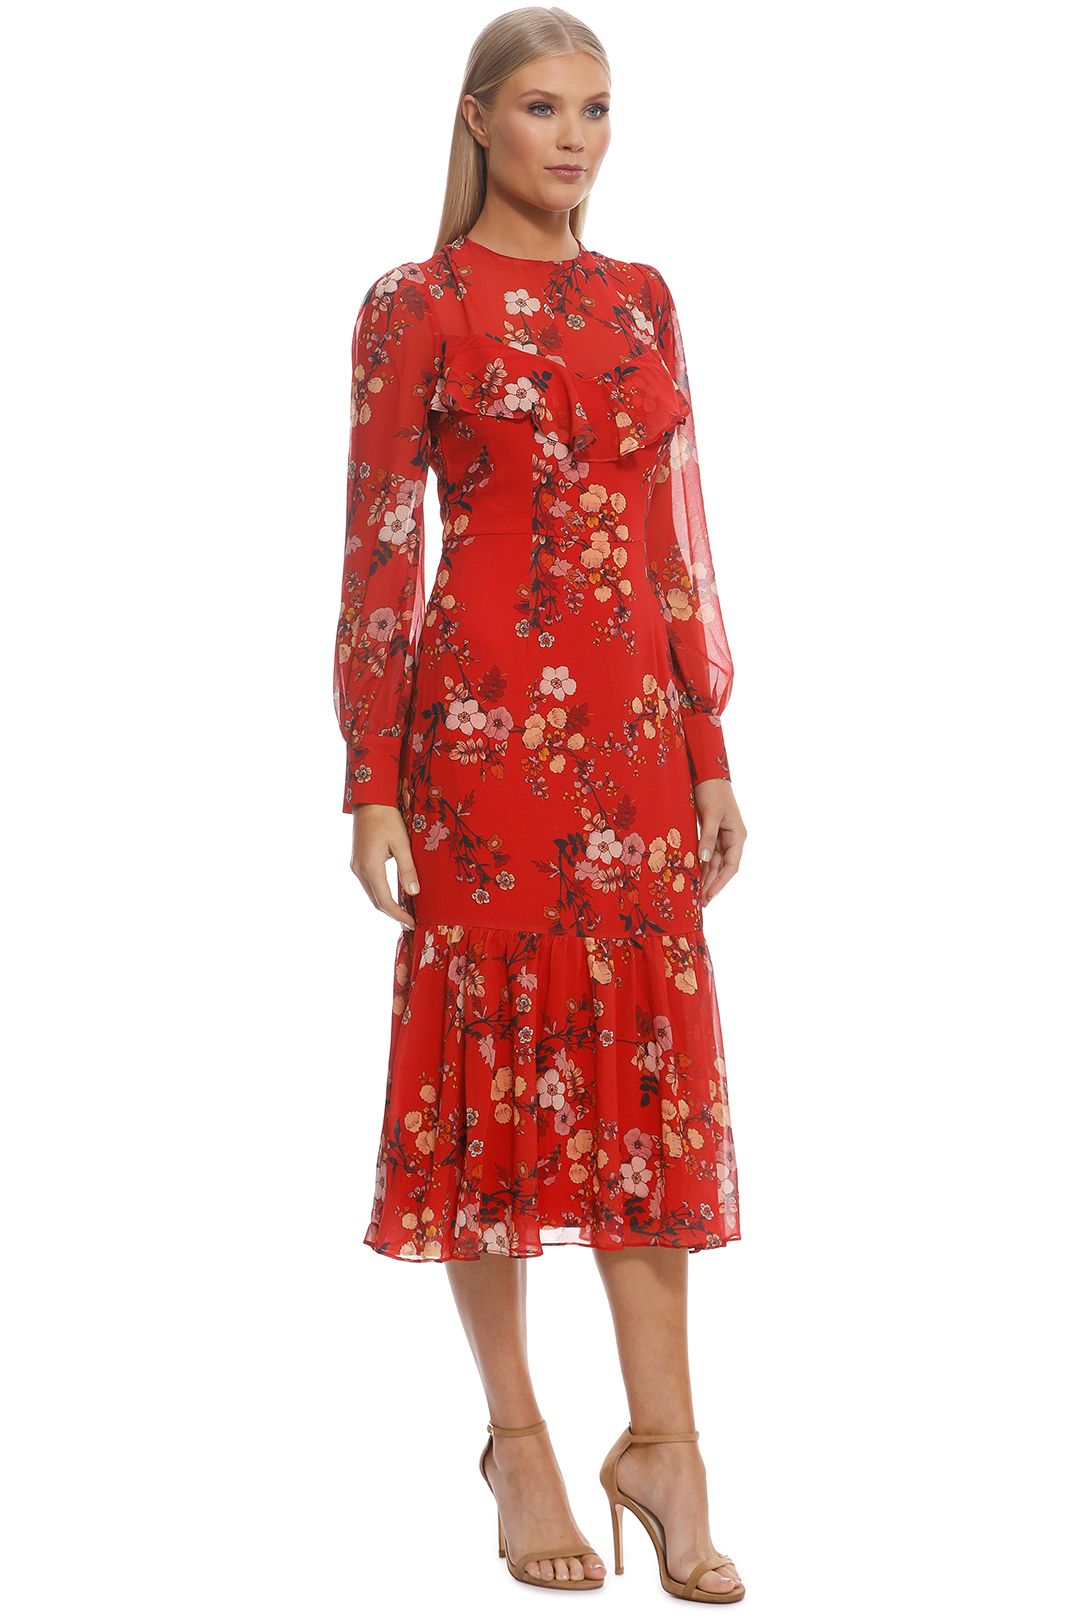 Cooper St - Disco Long Sleeve Fitted Midi Dress - Red - Side